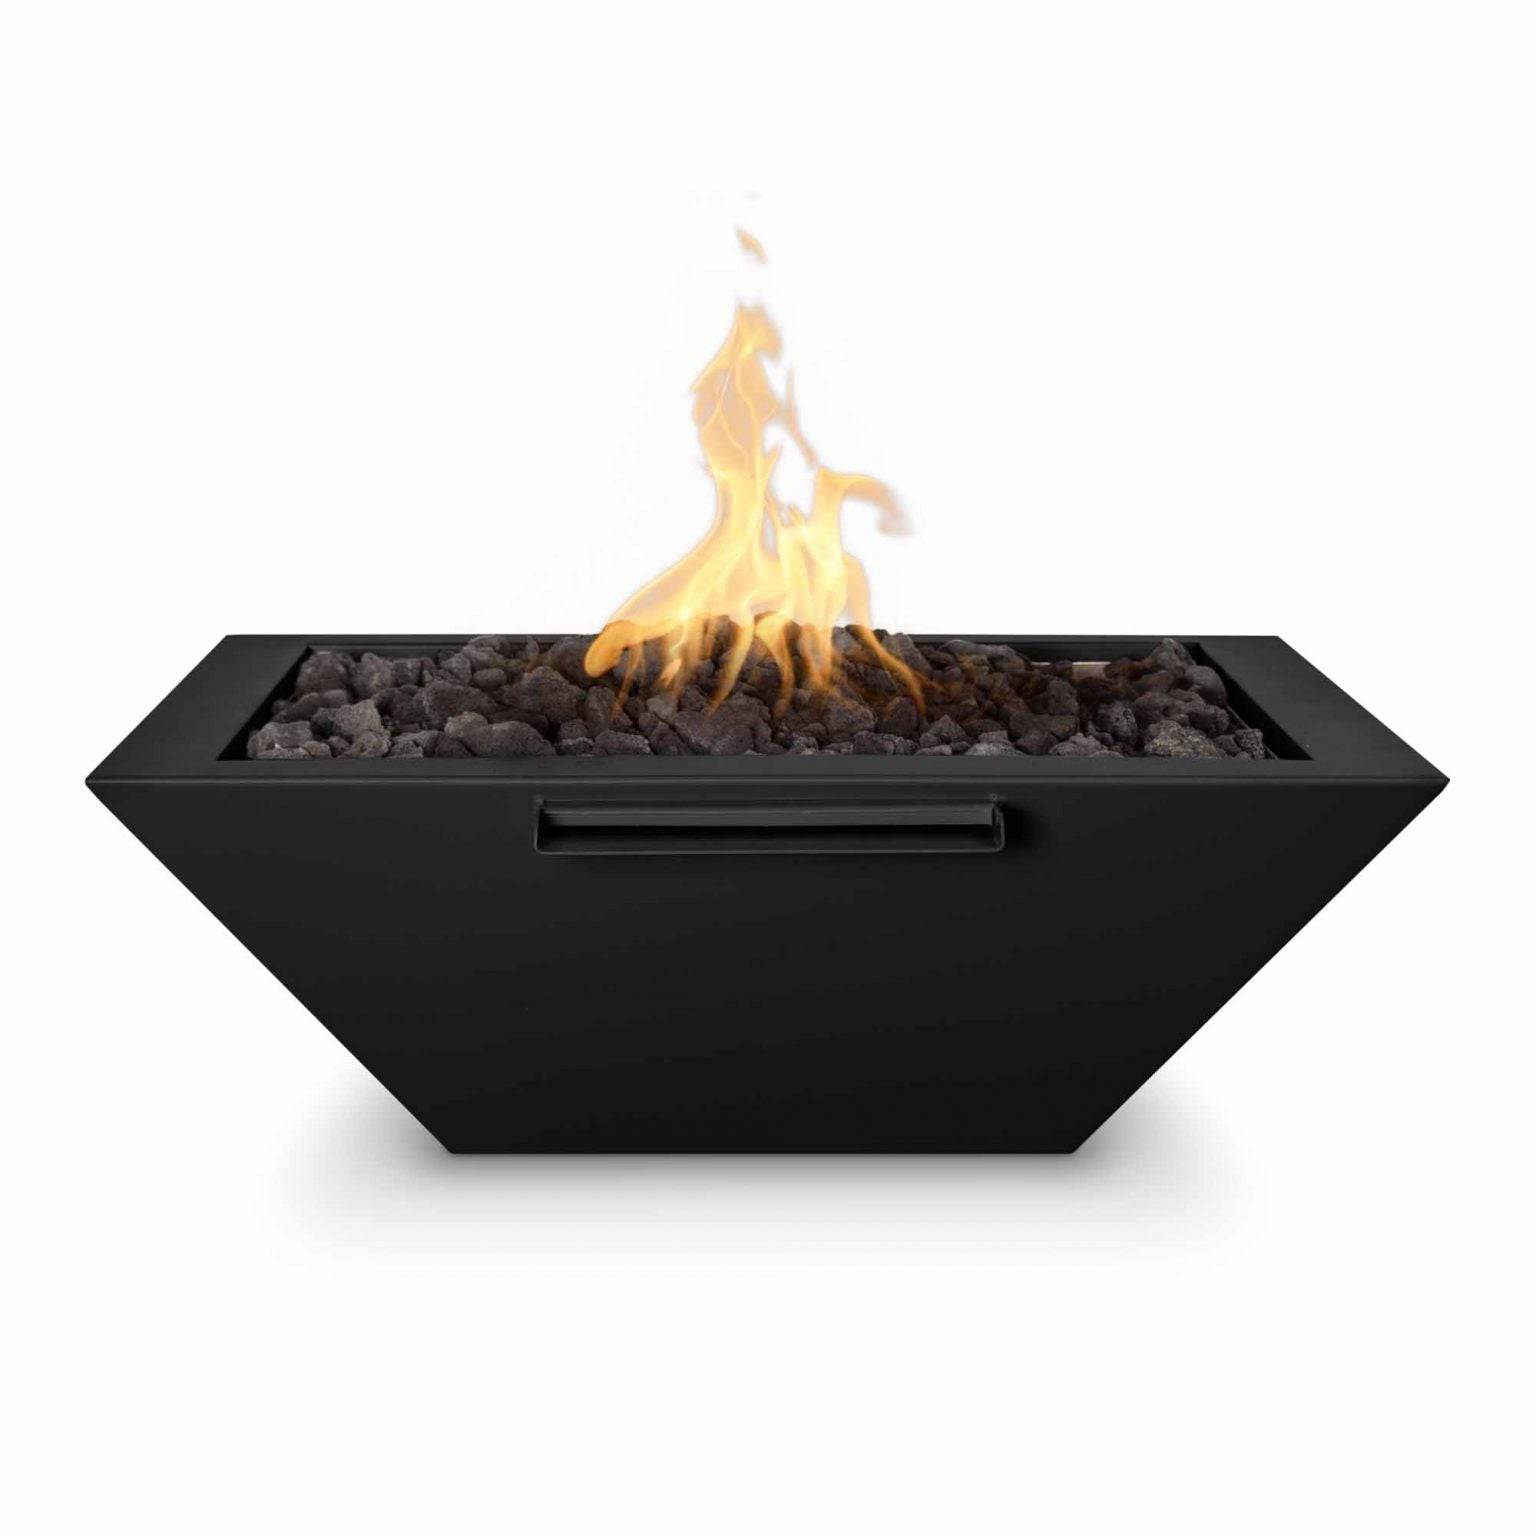 The Outdoor Plus Maya Fire & Water Bowl Powder Coated Metal OPT-XXSQPCFW - Serenity Provision